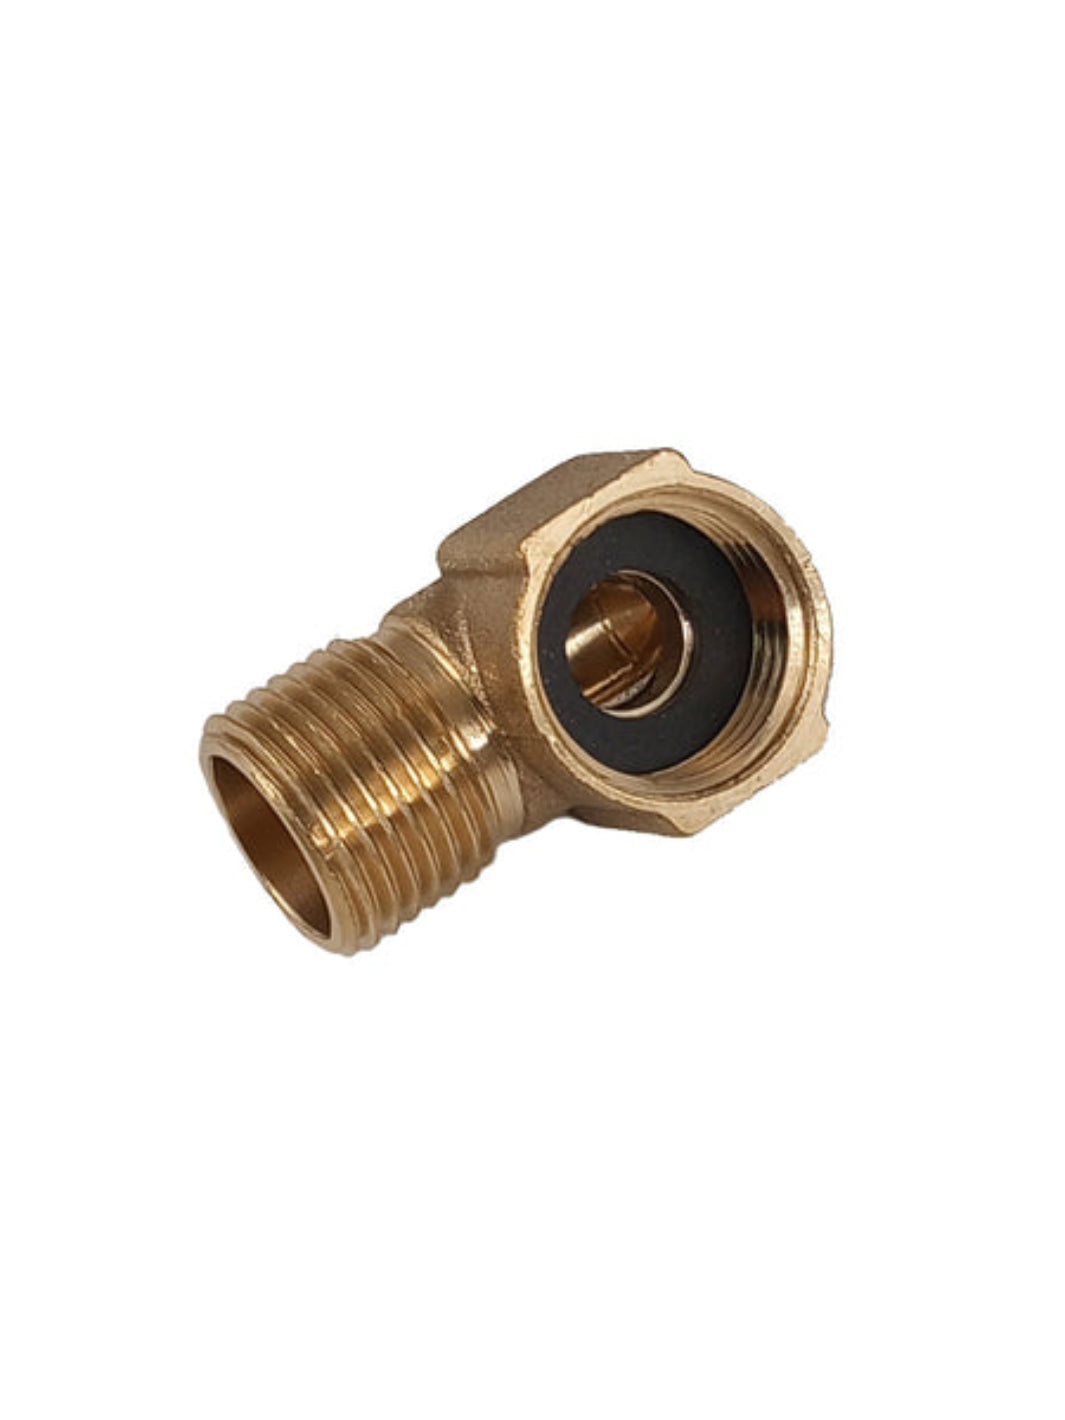 1/2" F BSP x 1/2" M BSP Brass 90 for Counter Top Pitcher Rinsers